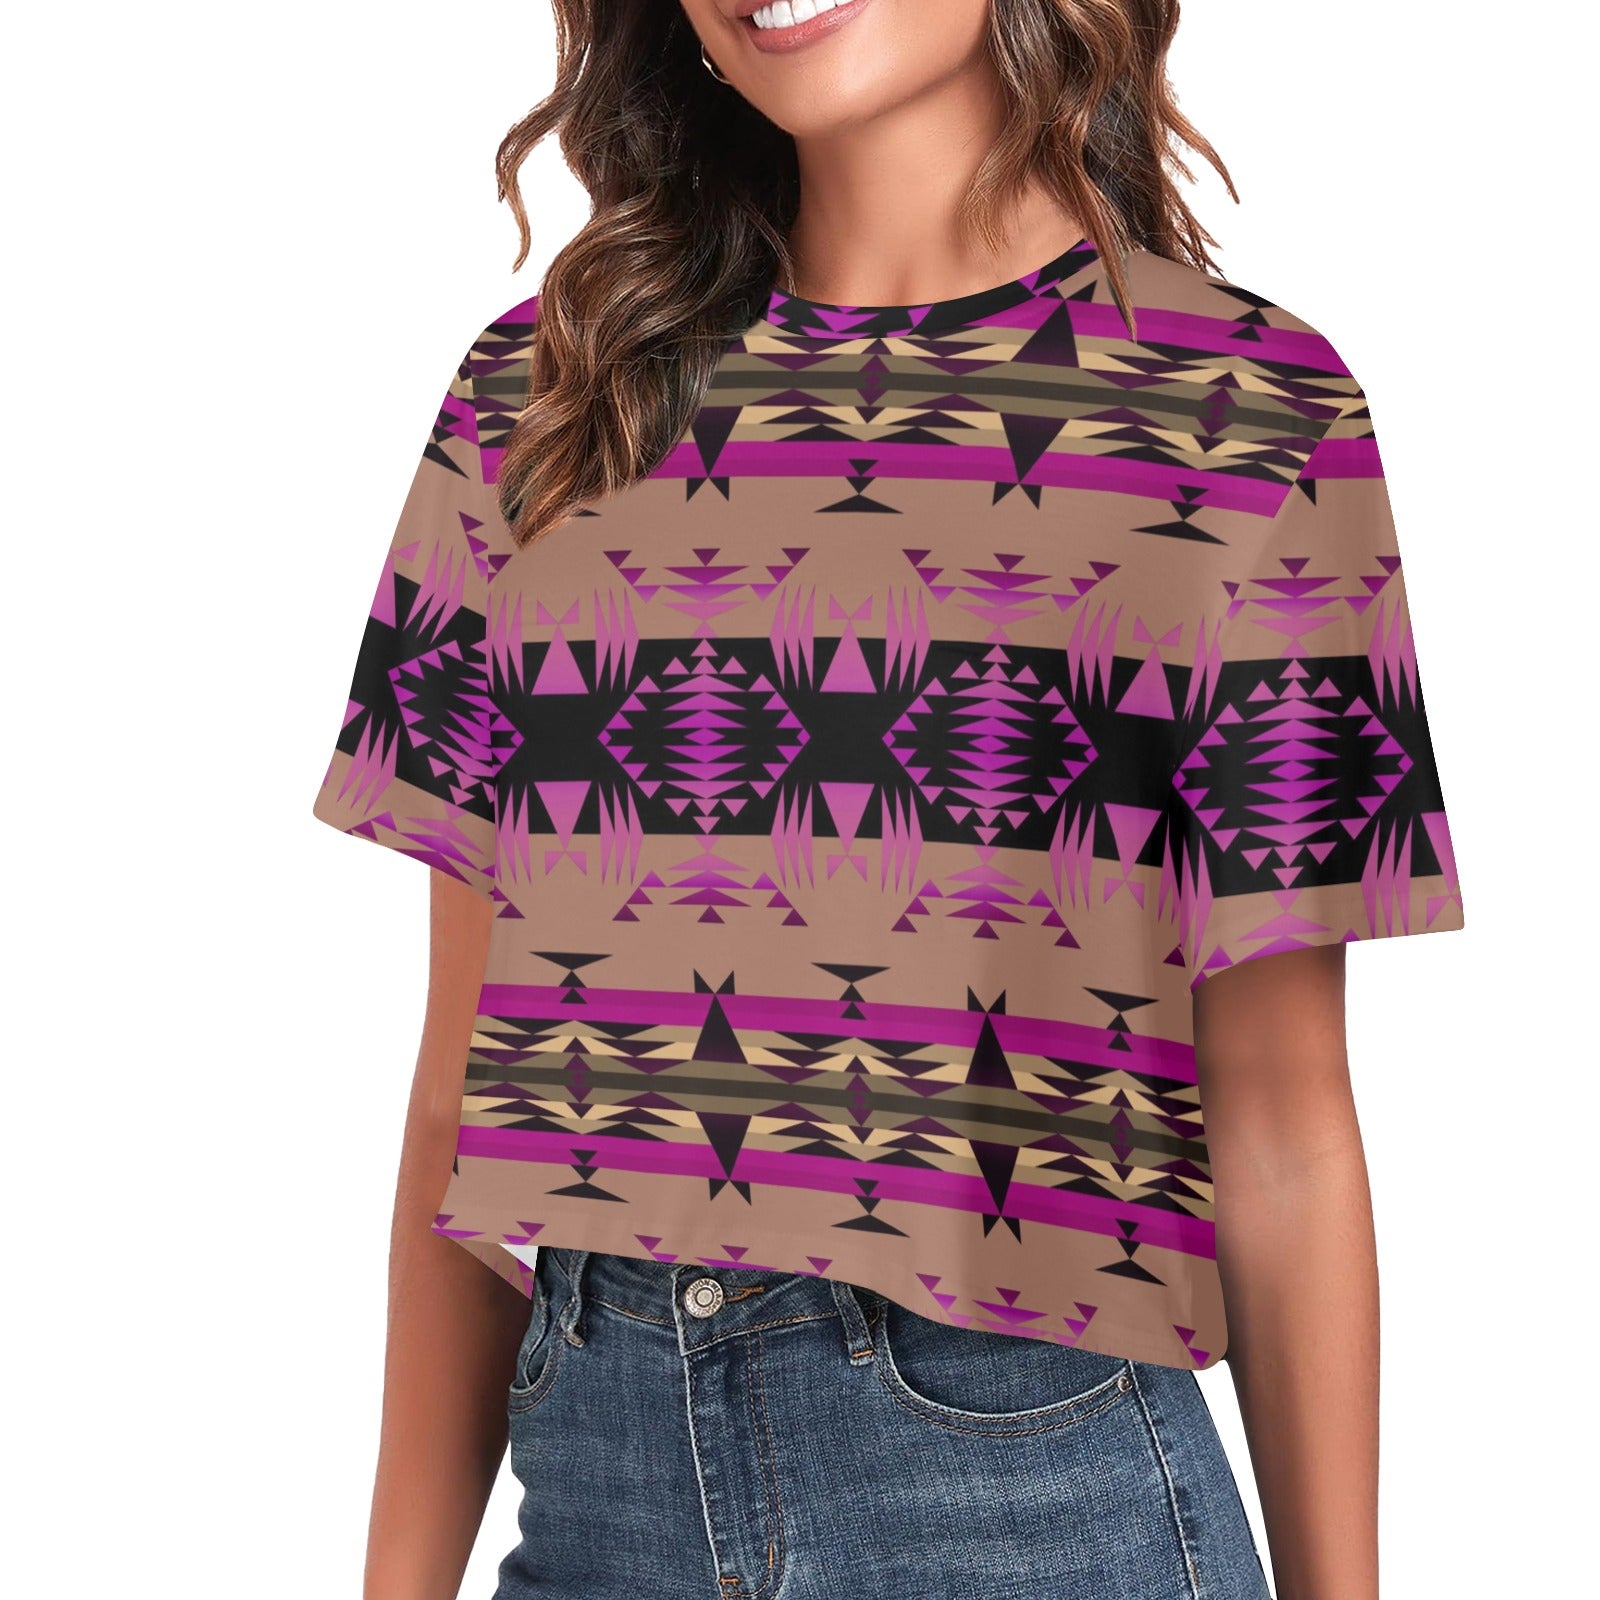 Between the Mountains Berry Women's Cropped T-shirt